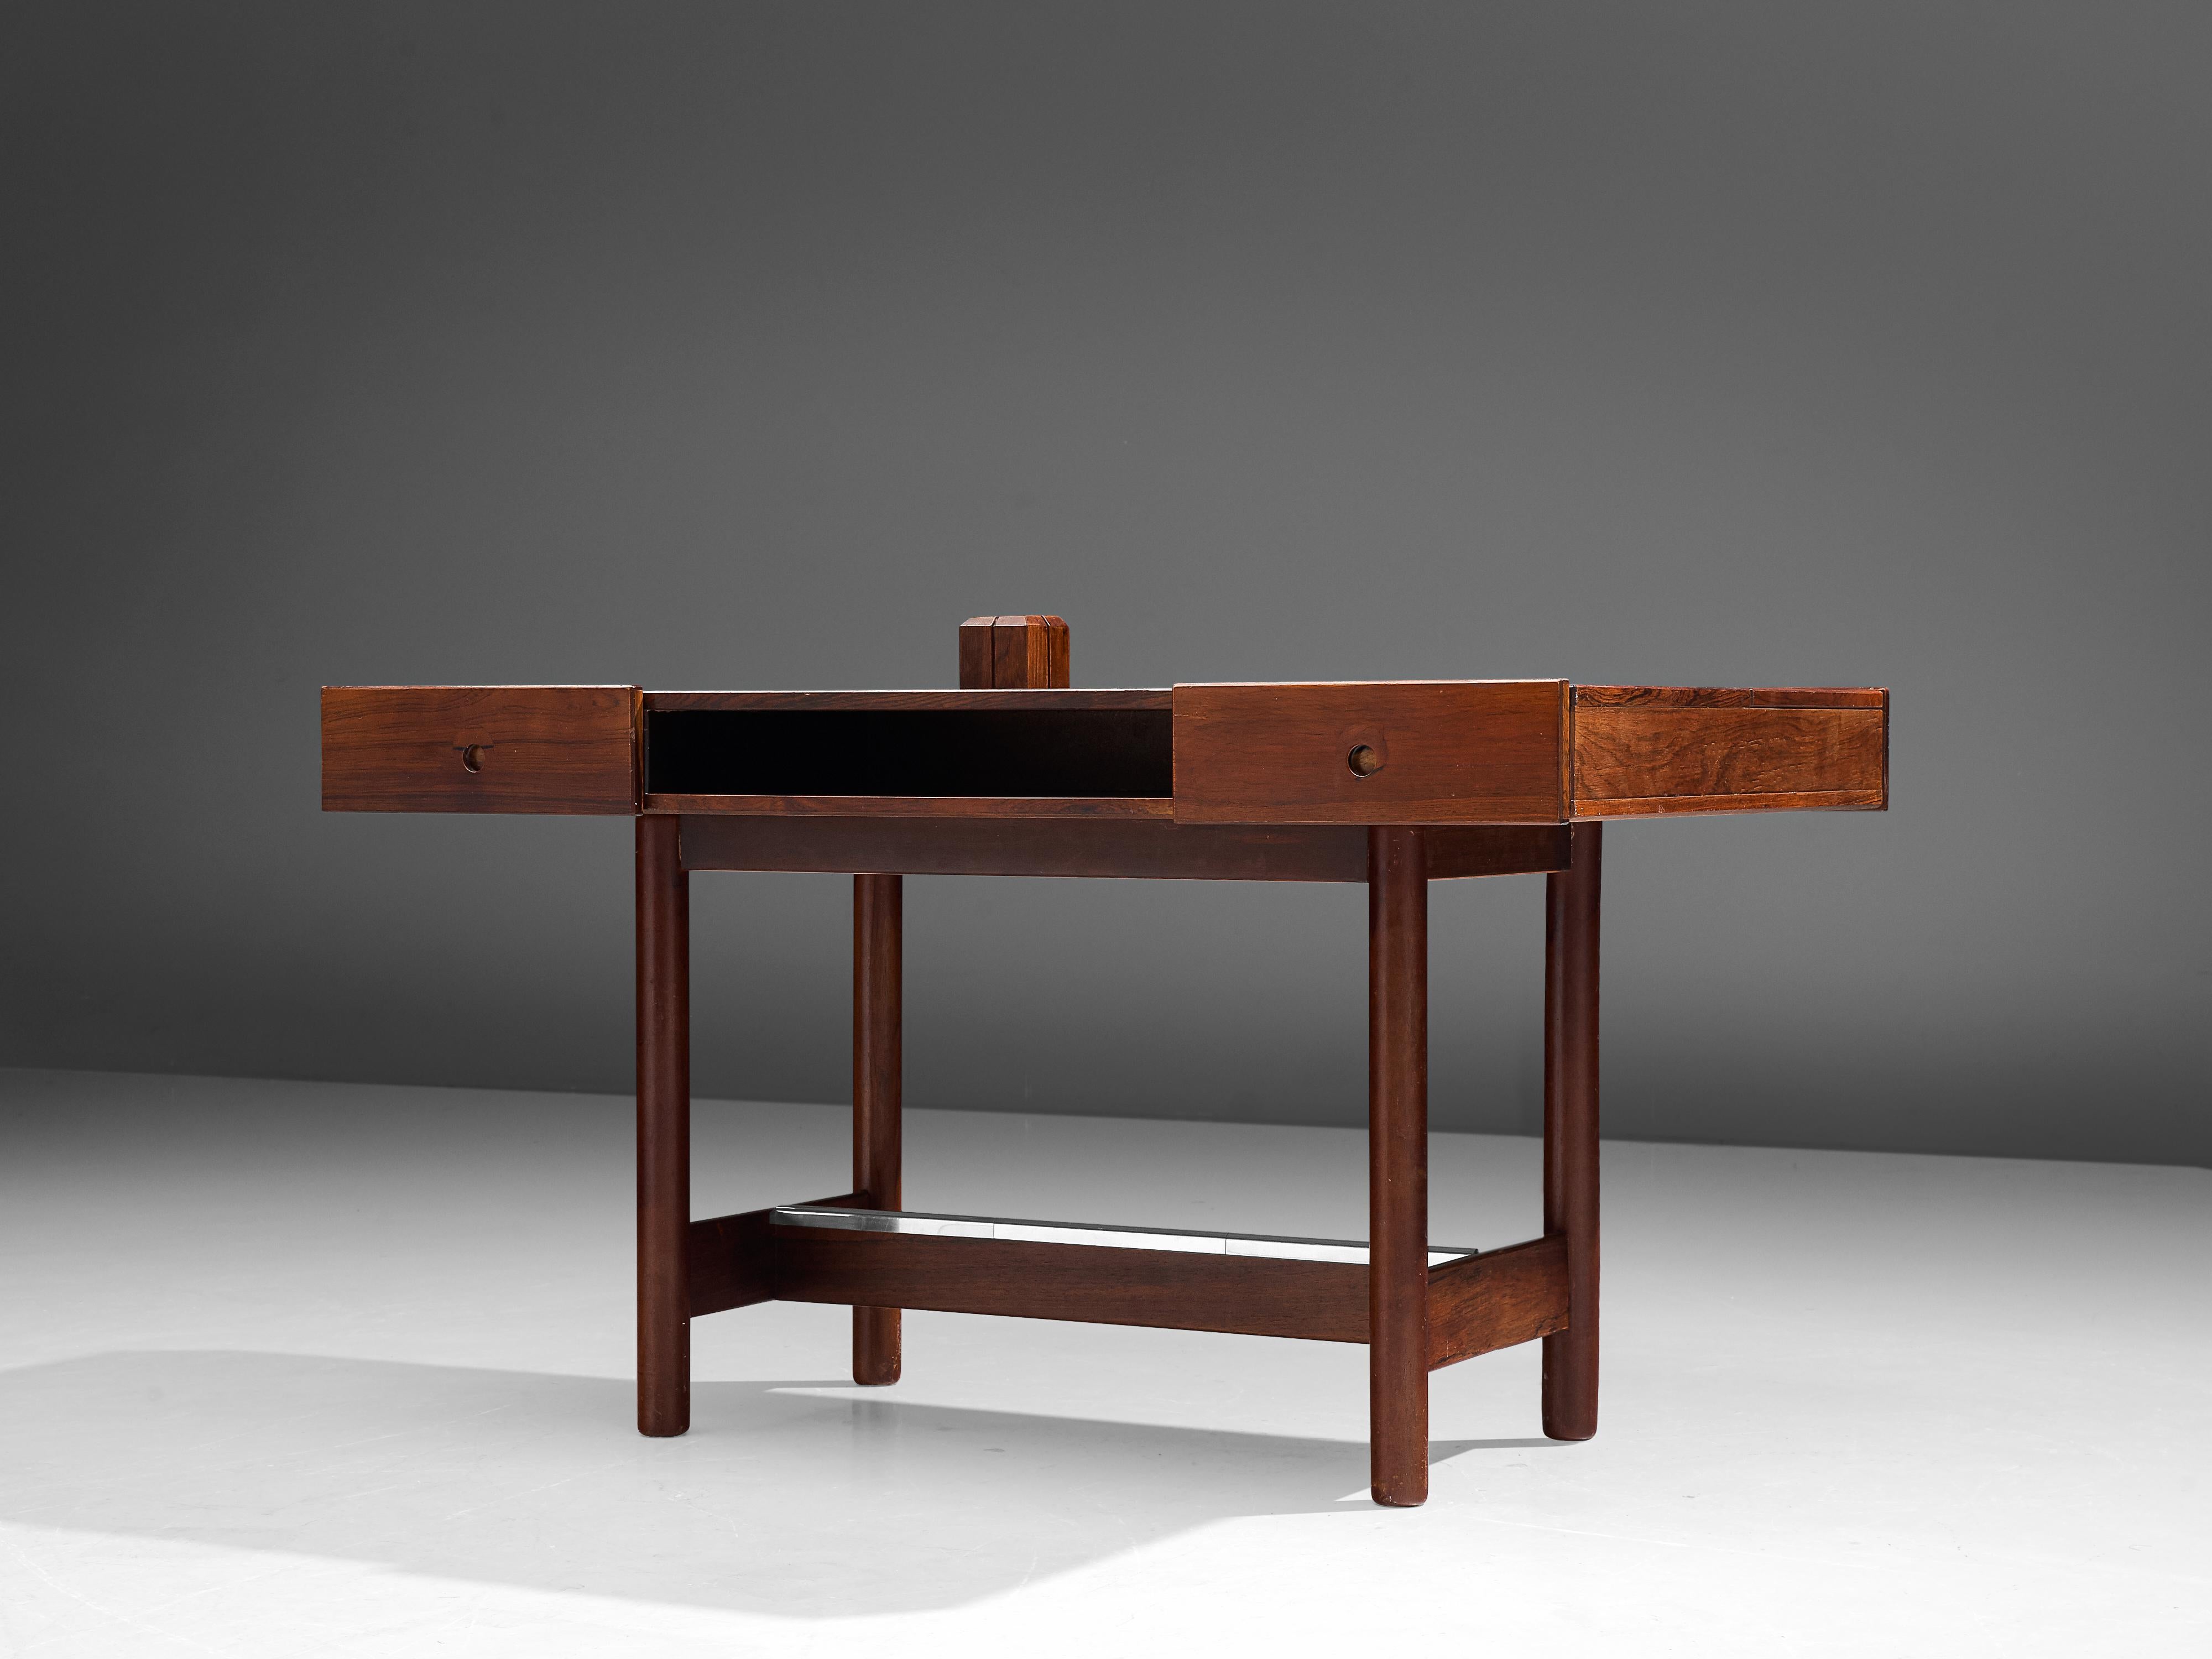 Desk, rosewood and metal, Denmark, 1960s

Scandinavian Modern desk in the manner of Peter Hvidt and Orla Mølgaard. Simplistic and functional design, for instance the drawers that are placed below the desk top. Between the drawers is an open storage